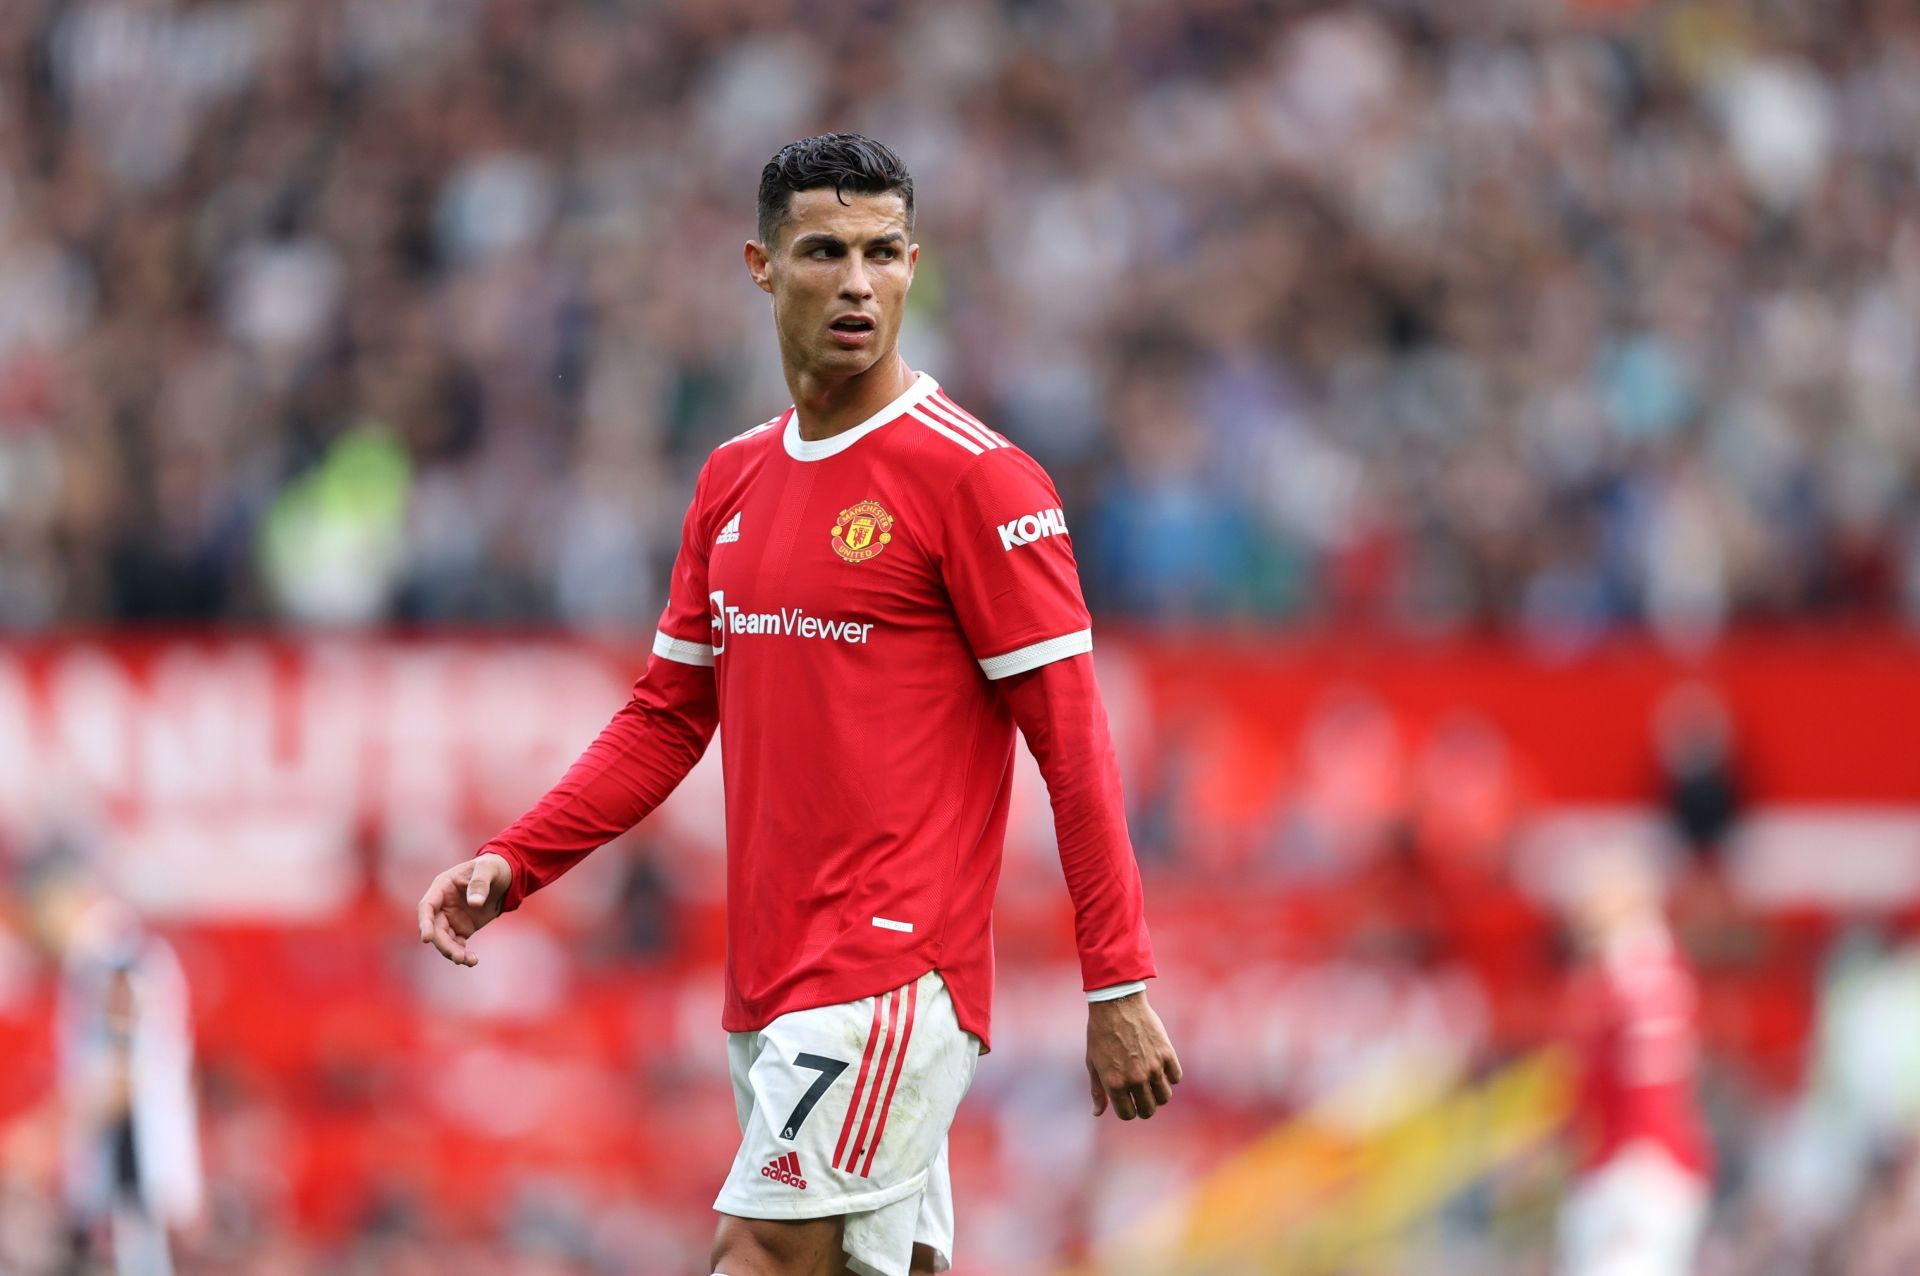 Cristiano Ronaldo has been important to Manchester United this season